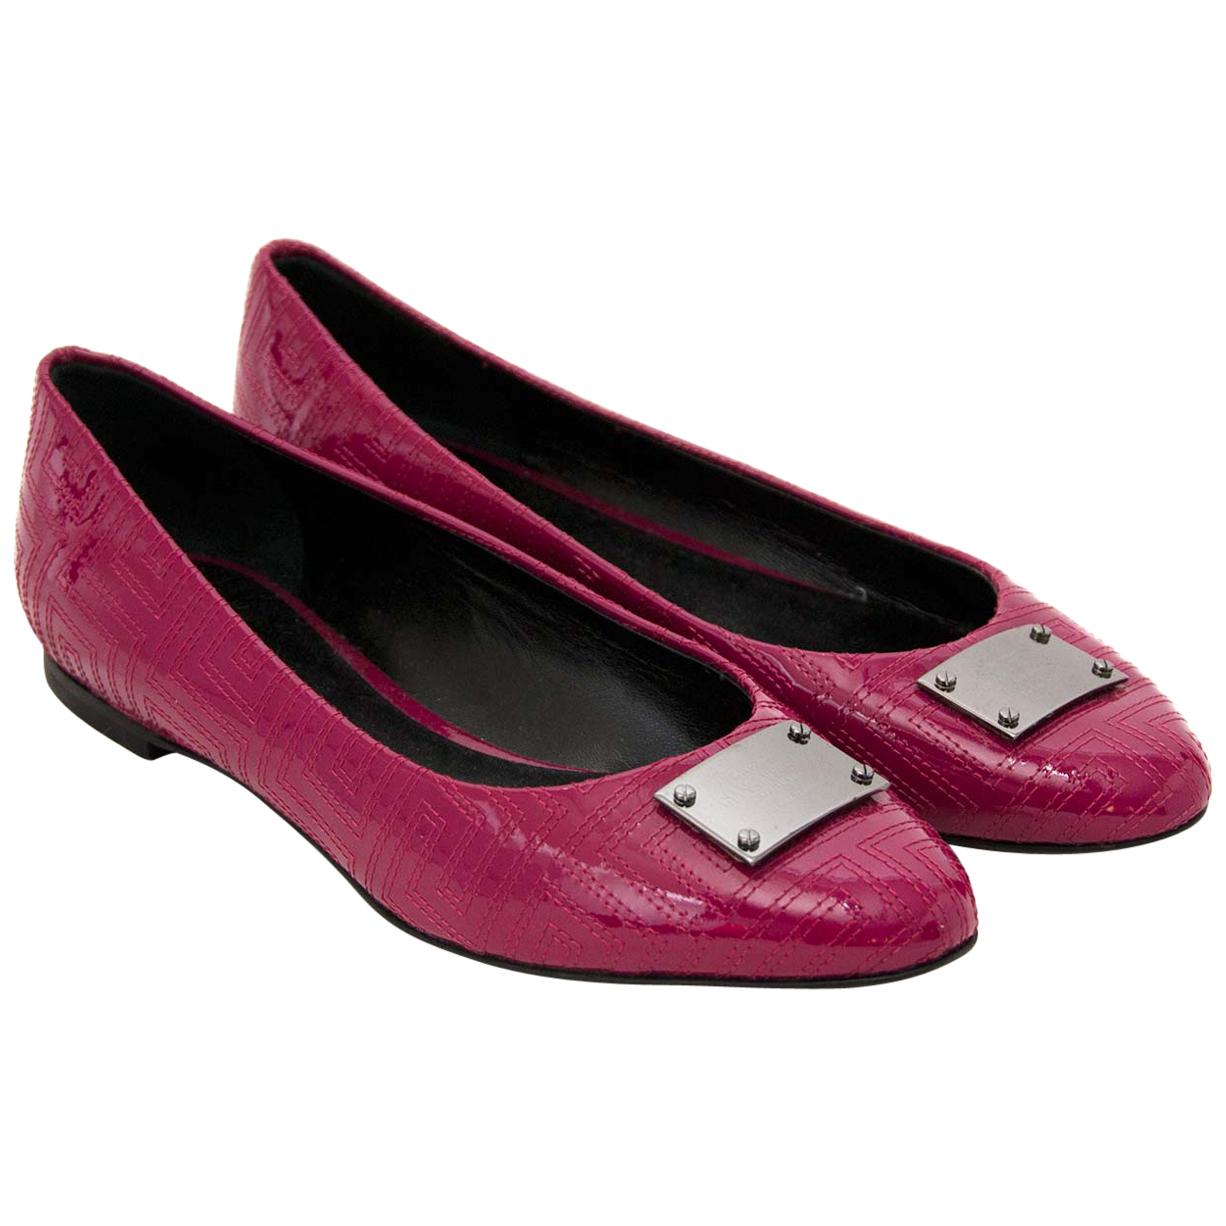 Gianni Versace Couture Patent Fuchsia Ballerinas - size 37, 5 For Sale